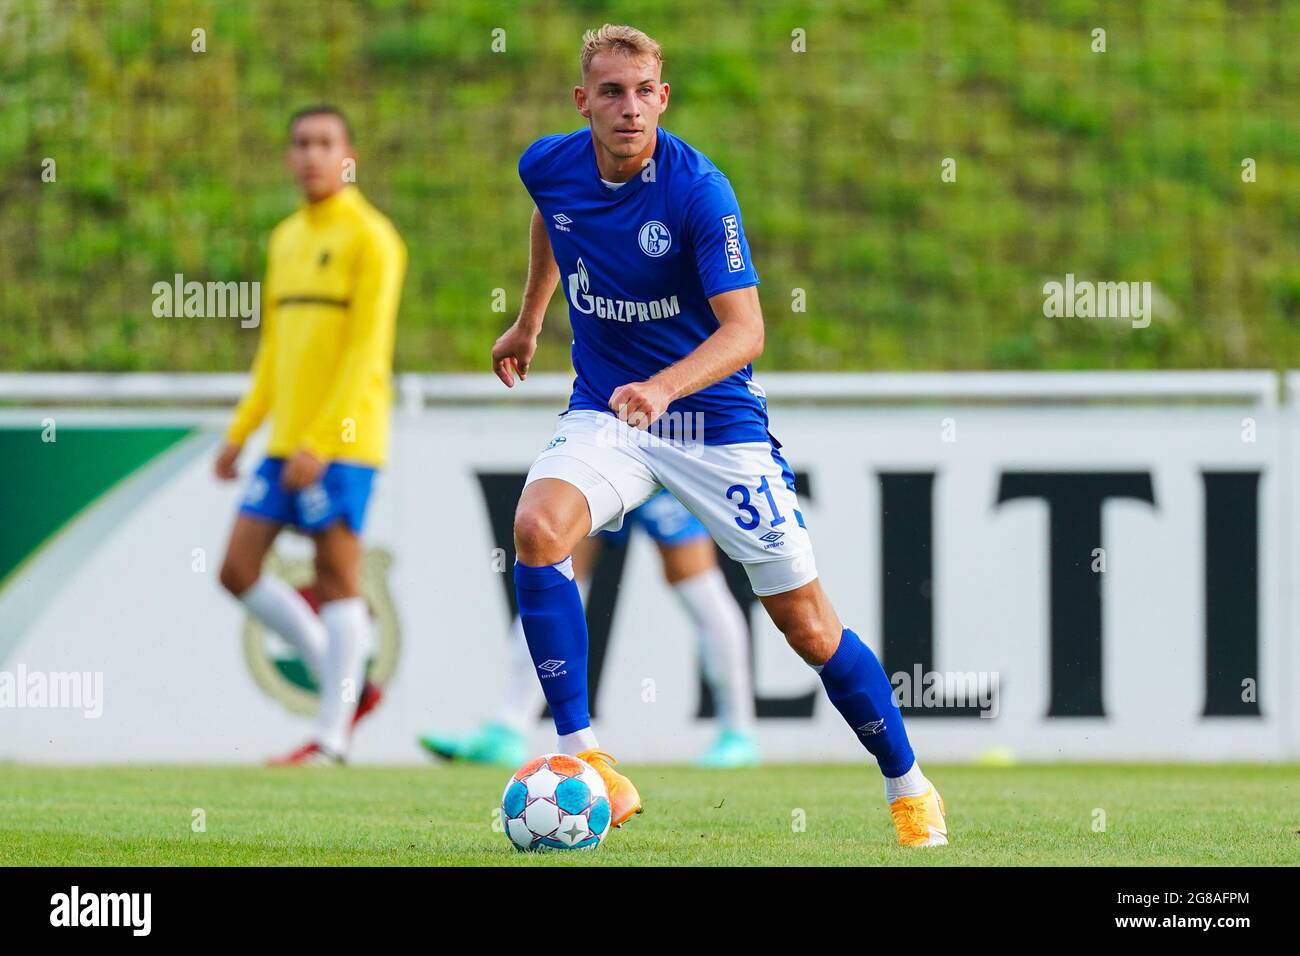 GELSENKIRCHEN, GERMANY - JULY 16: Timo Becker of Schalke 04 controlls the  ball during the Club Friendly match between FC Schalke 04 and Vitesse at  Parkstadion on July 16, 2021 in Gelsenkirchen,